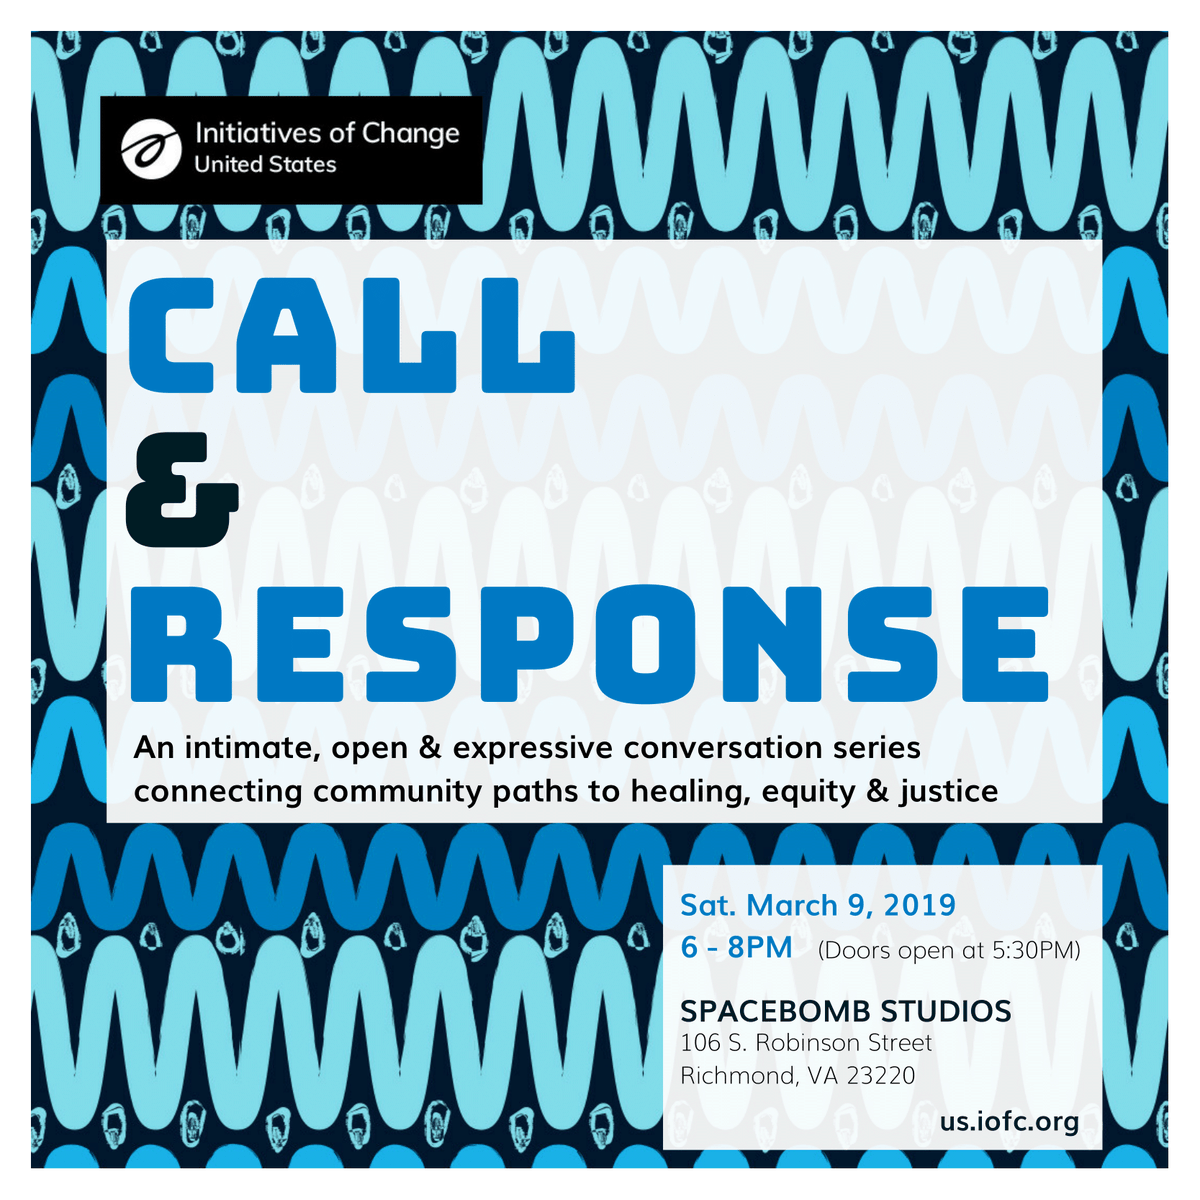 We invite you to our first conversation series entitled CALL & RESPONSE on Sat. March 9th, 6-8pm at Spacebomb (106 S. Robinson St).
In what ways do our communities keep breaking down & how can we keep building up? Let's talk it out. #trustbuilding #unearthingVA #justiceandequity